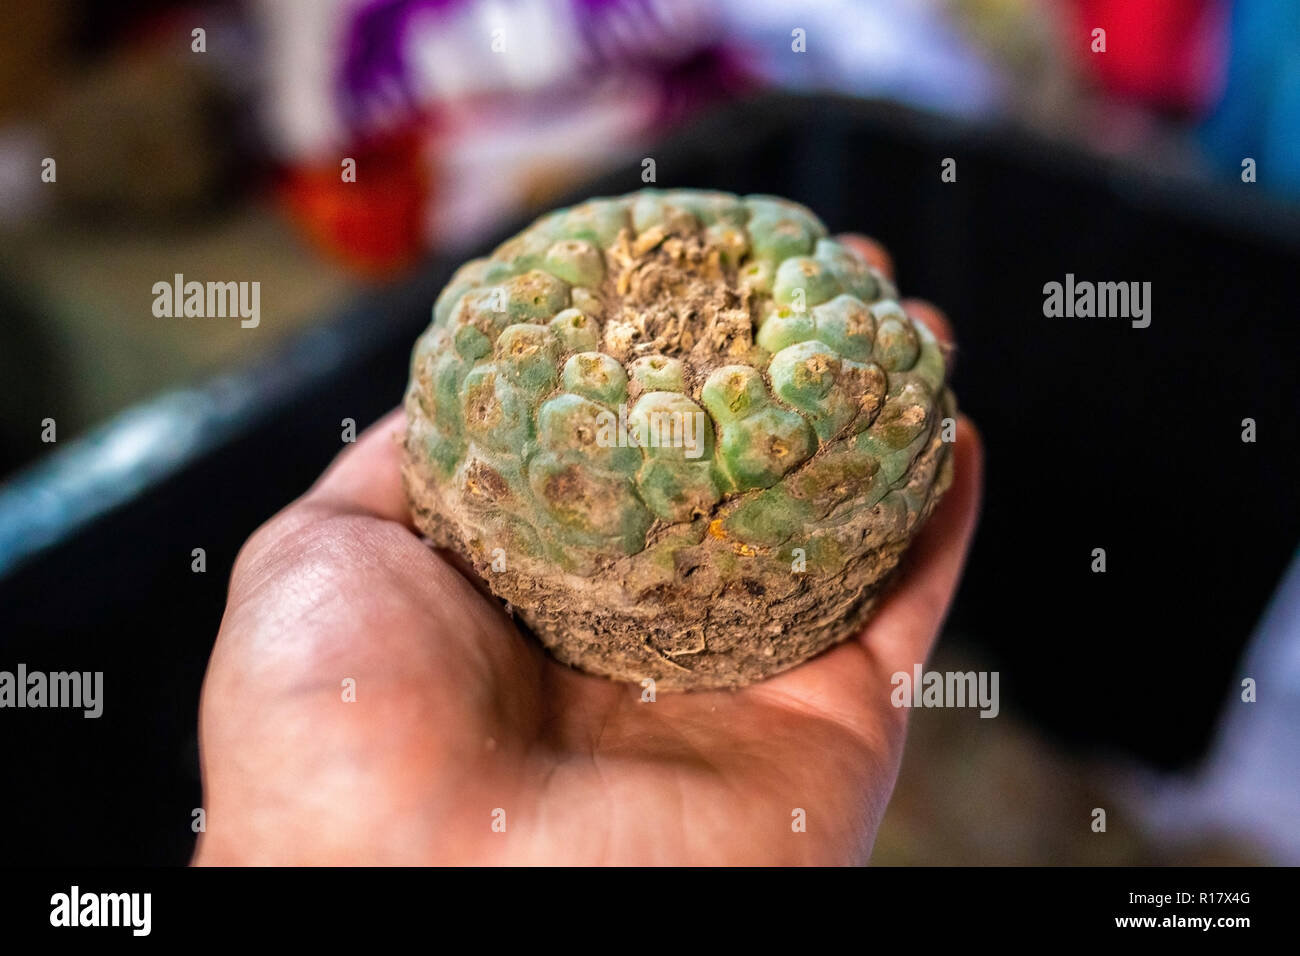 Peyote harvested cactus with mescaline isolated Stock Photo